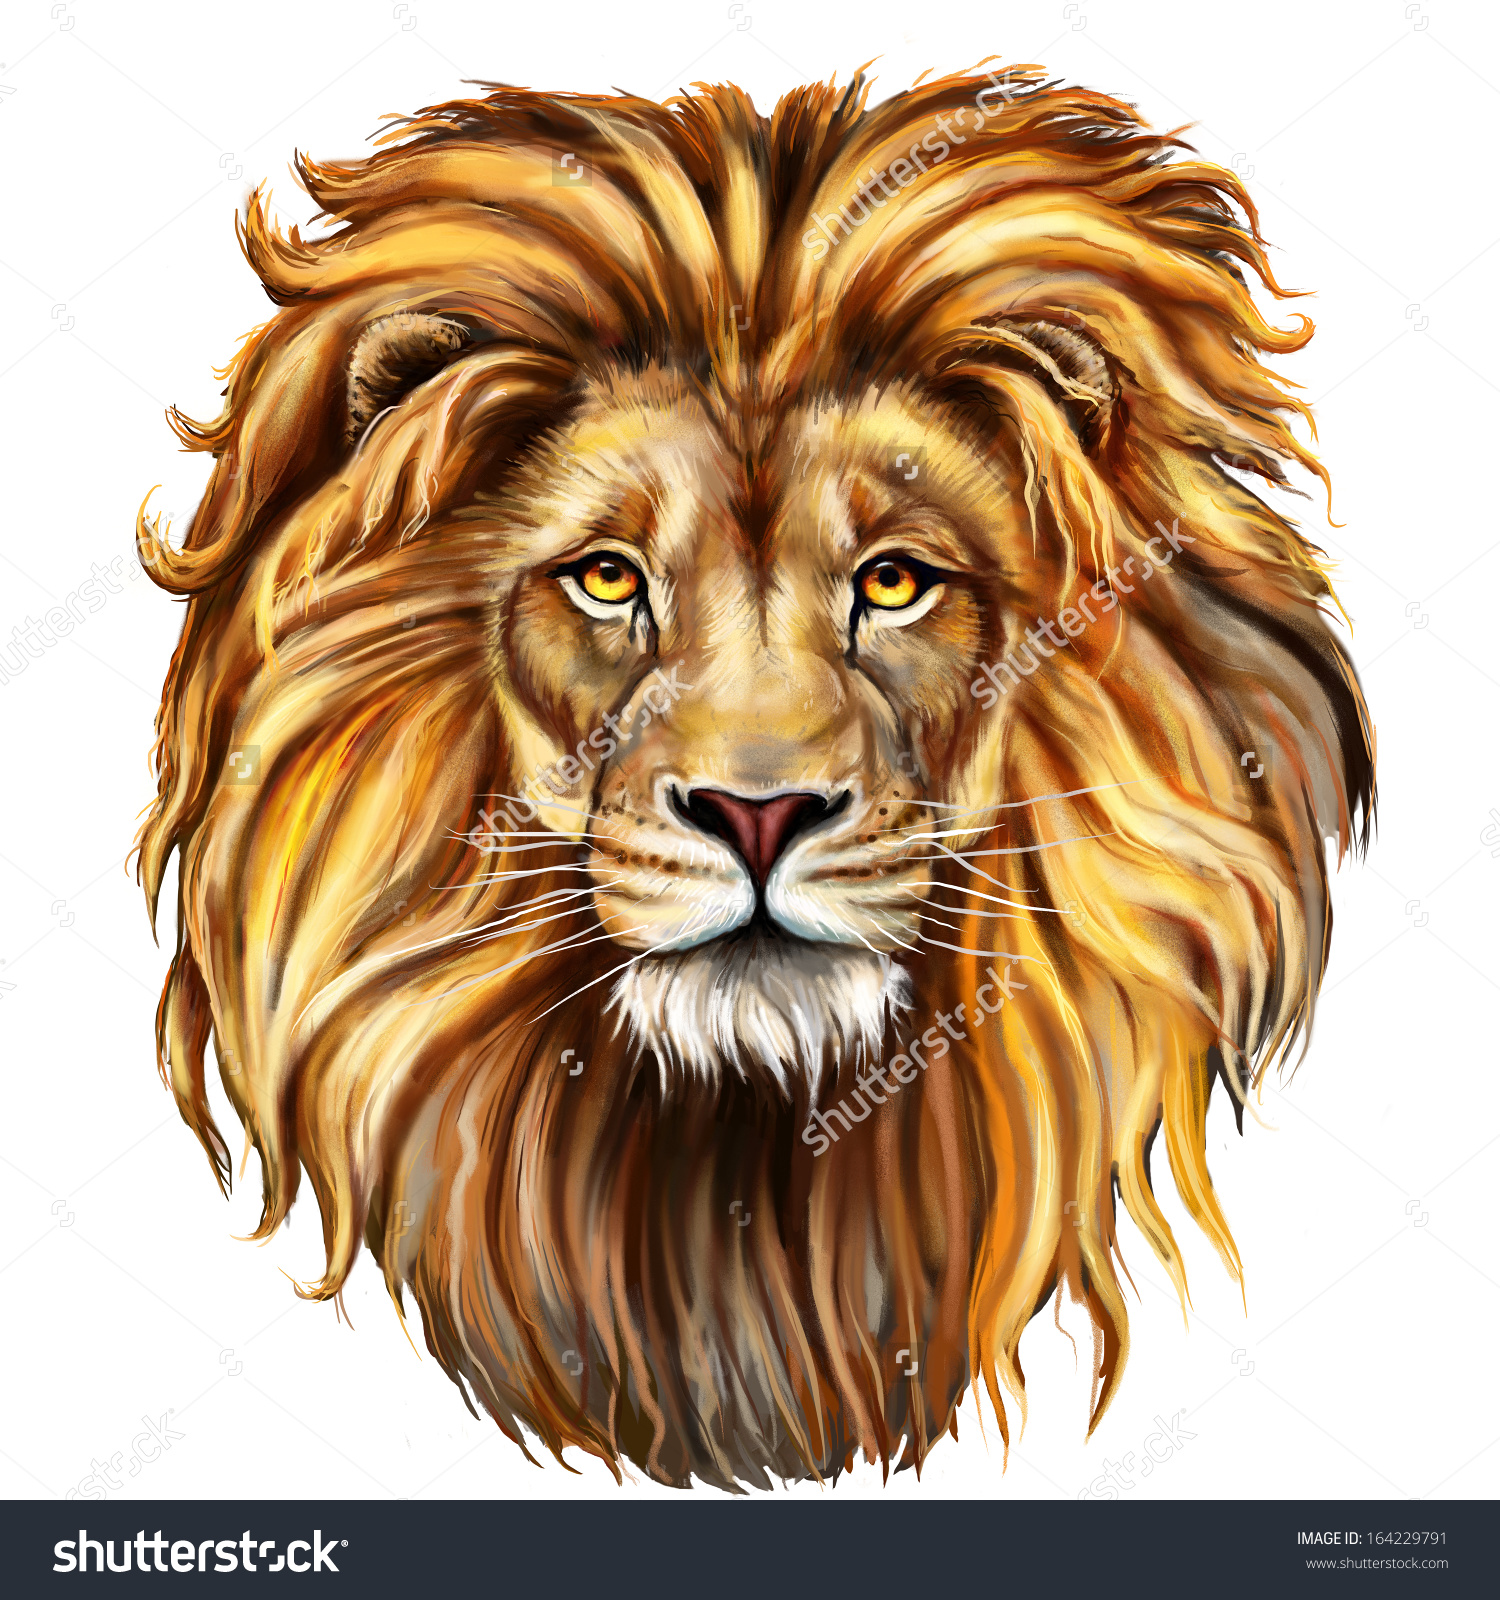 Lion Head Drawing at GetDrawings.com | Free for personal use Lion ...